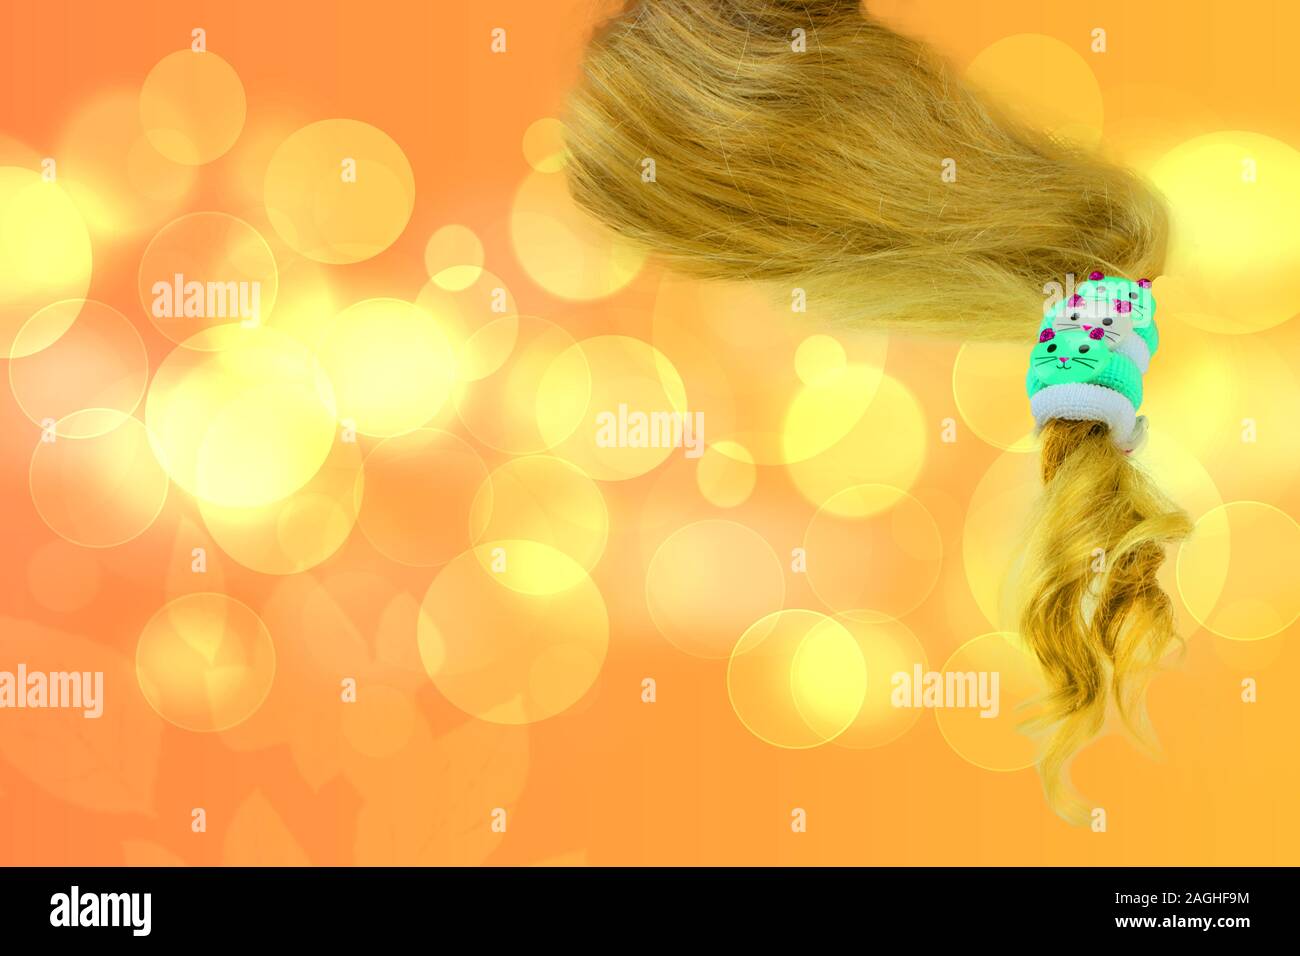 Ponytail hair holder. Closeup of three cute elastic fabric hair bands in shape of cats for kids on a piece of blonde hairs against abstract blurred go Stock Photo